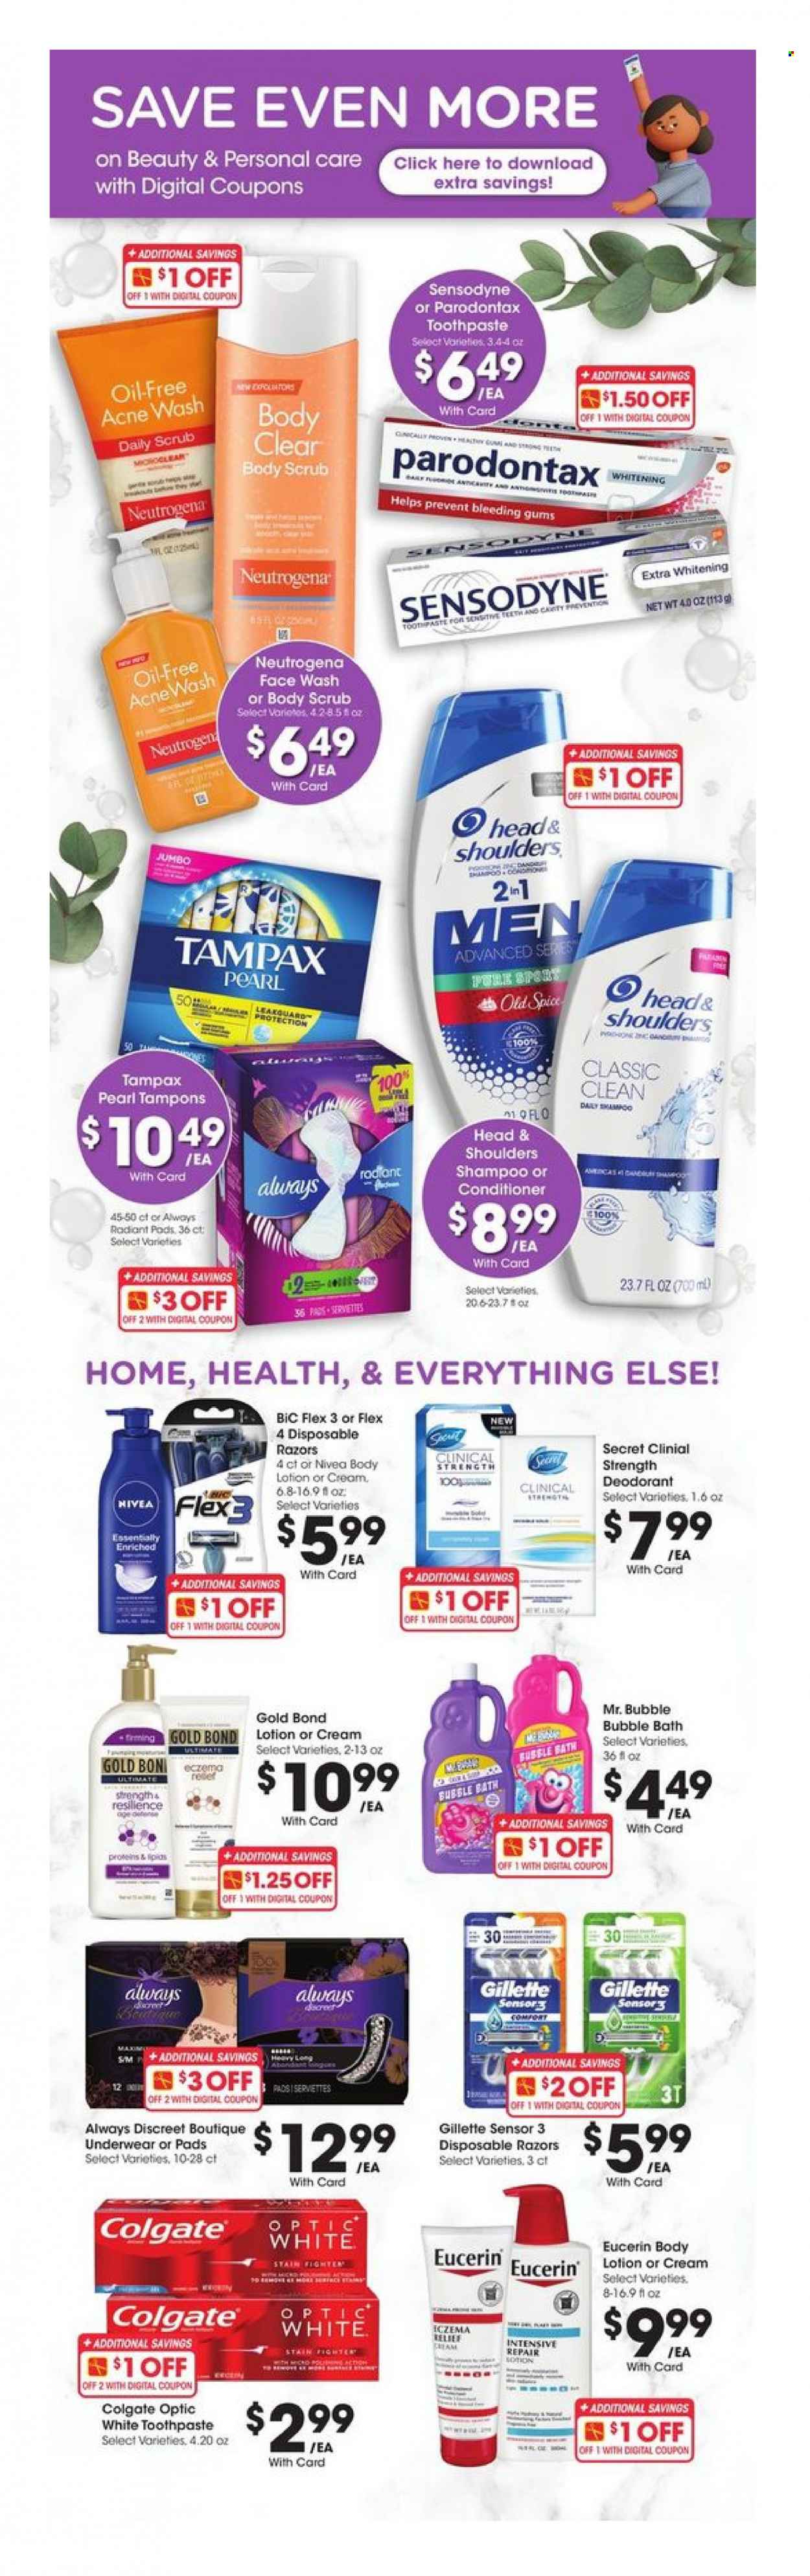 thumbnail - Smith's Flyer - 01/05/2022 - 02/01/2022 - Sales products - spice, Nivea, bubble bath, shampoo, Old Spice, face gel, Colgate, toothpaste, Sensodyne, Tampax, Always Discreet, tampons, Neutrogena, face wash, conditioner, Head & Shoulders, body lotion, body scrub, Eucerin, anti-perspirant, deodorant, BIC, Gillette, disposable razor. Page 1.